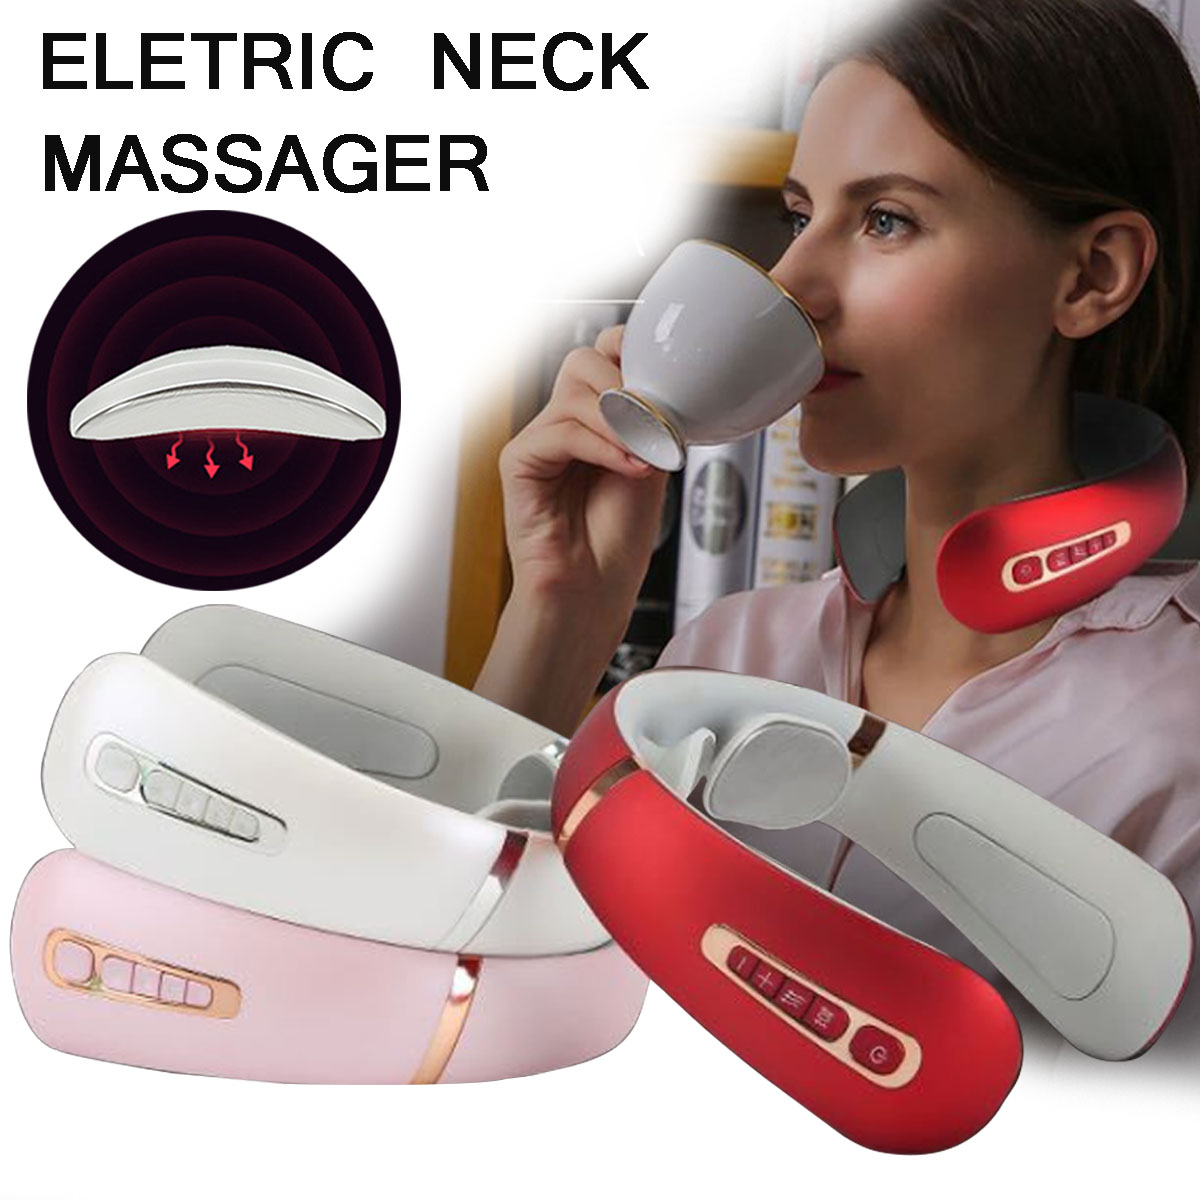 USB-Electric-Heating-Pulse-Neck-Massager-Magnetic-Pulse-Therapy-Relax-Vertebra-Treatment-1810137-2